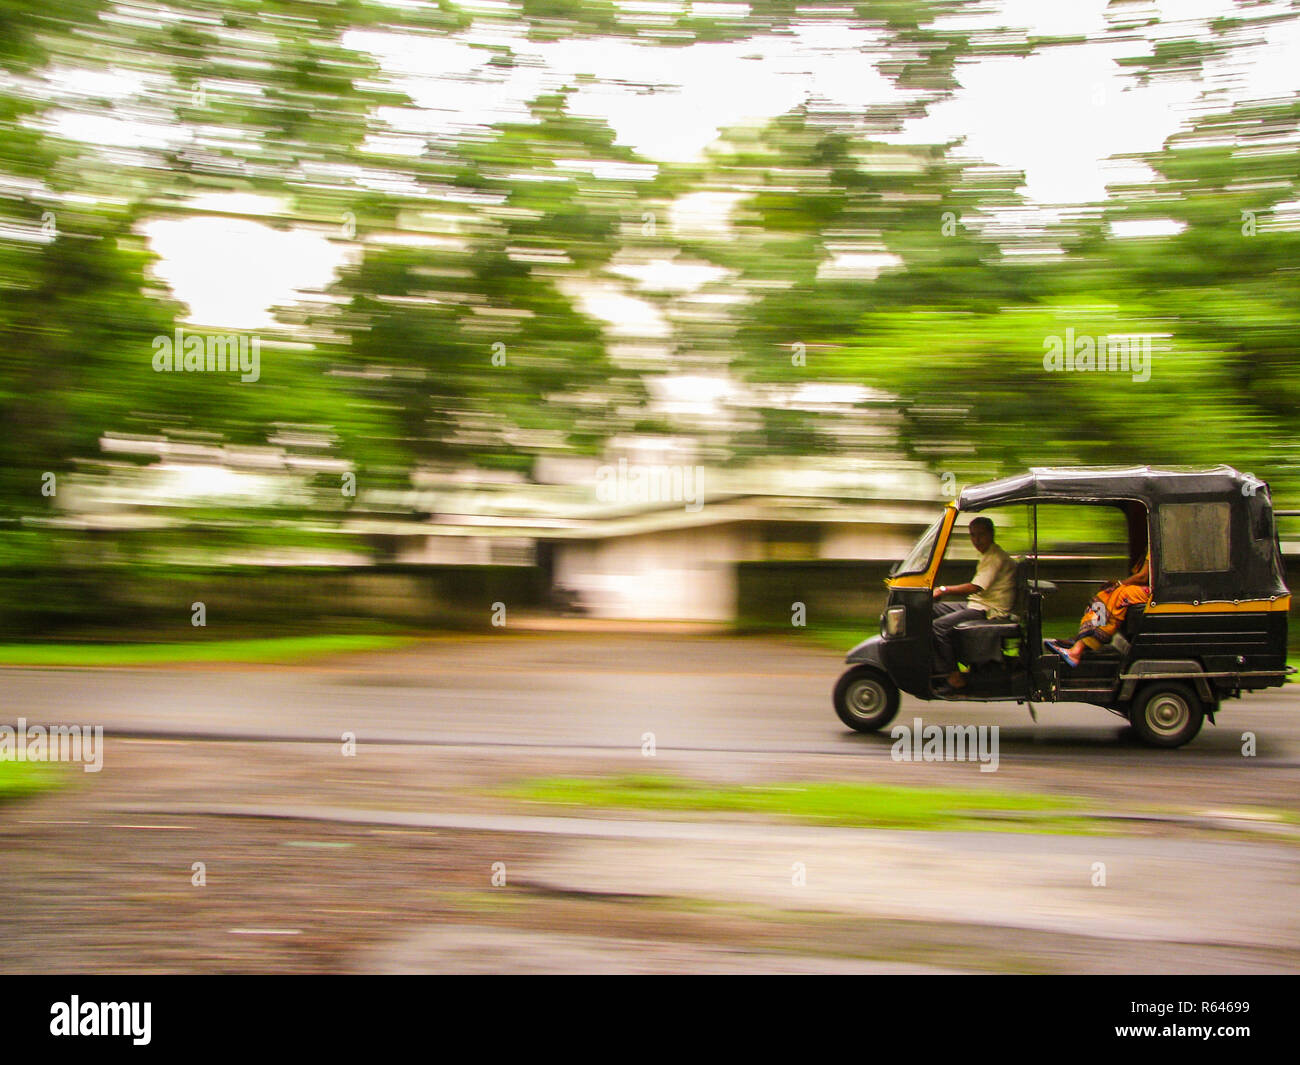 The photograph shows the panned shot of an Auto rickshaw speeding against trees in the background Stock Photo